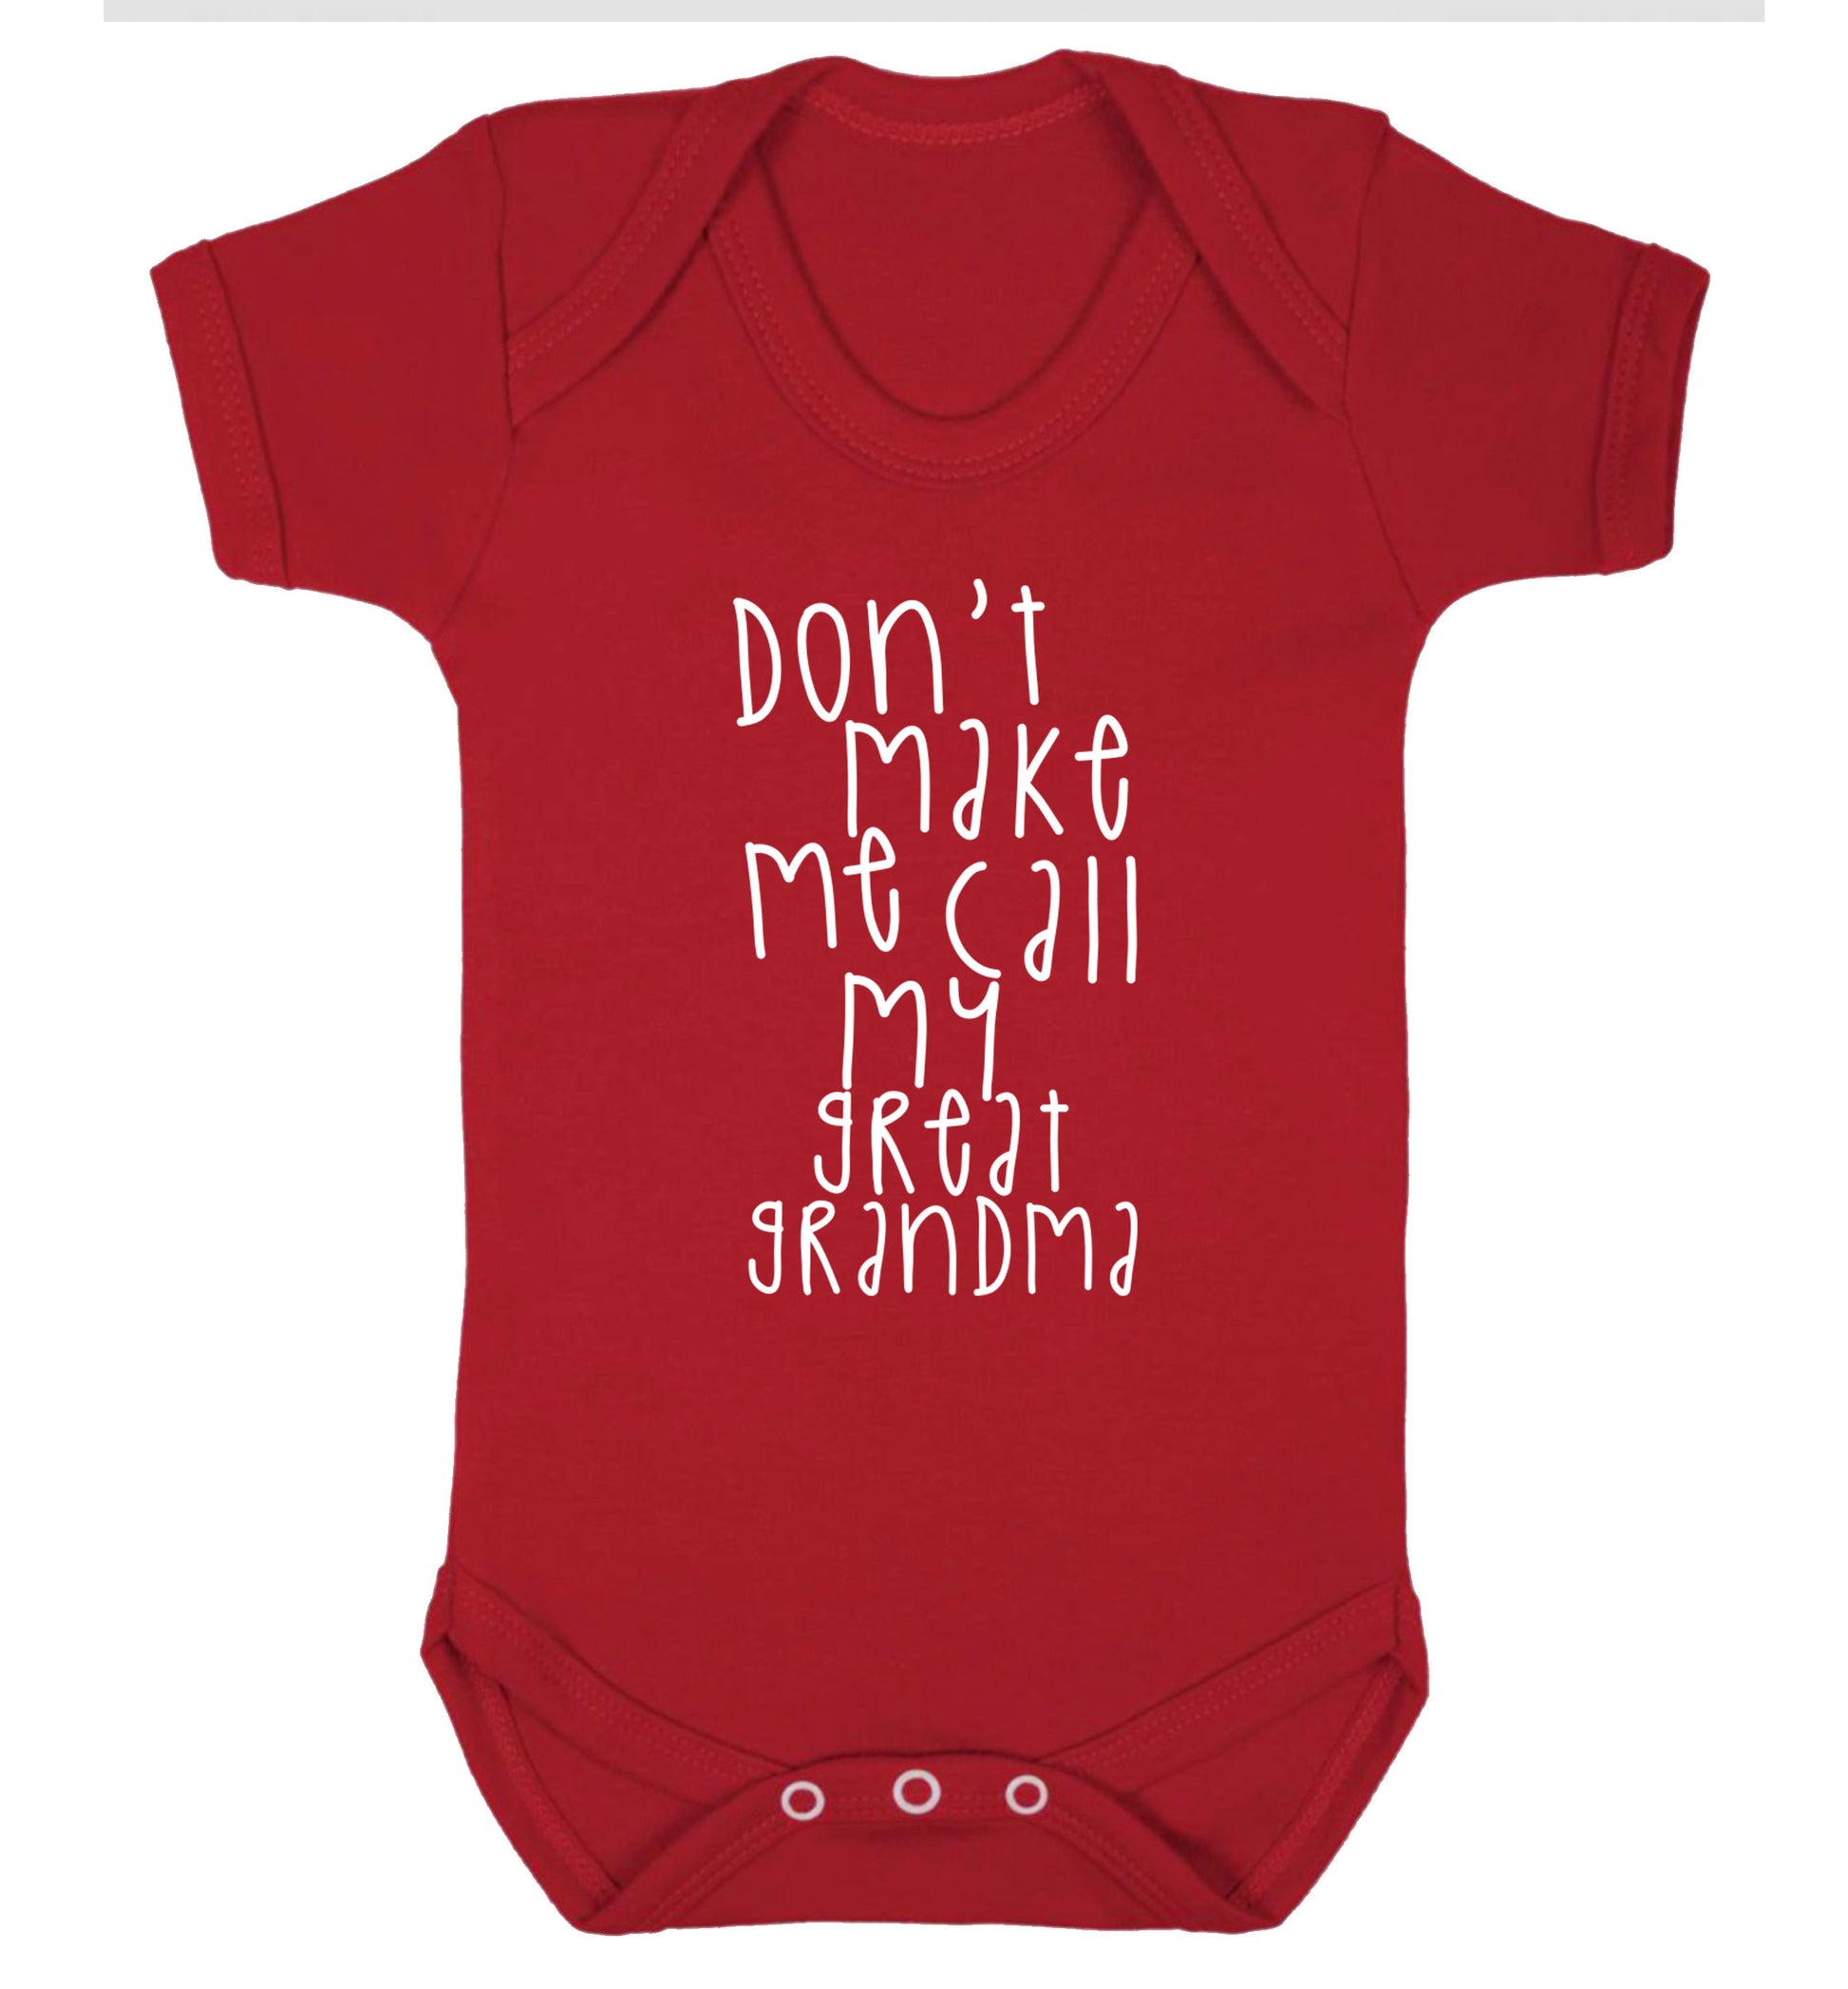 Don't make me call my great grandma Baby Vest red 18-24 months